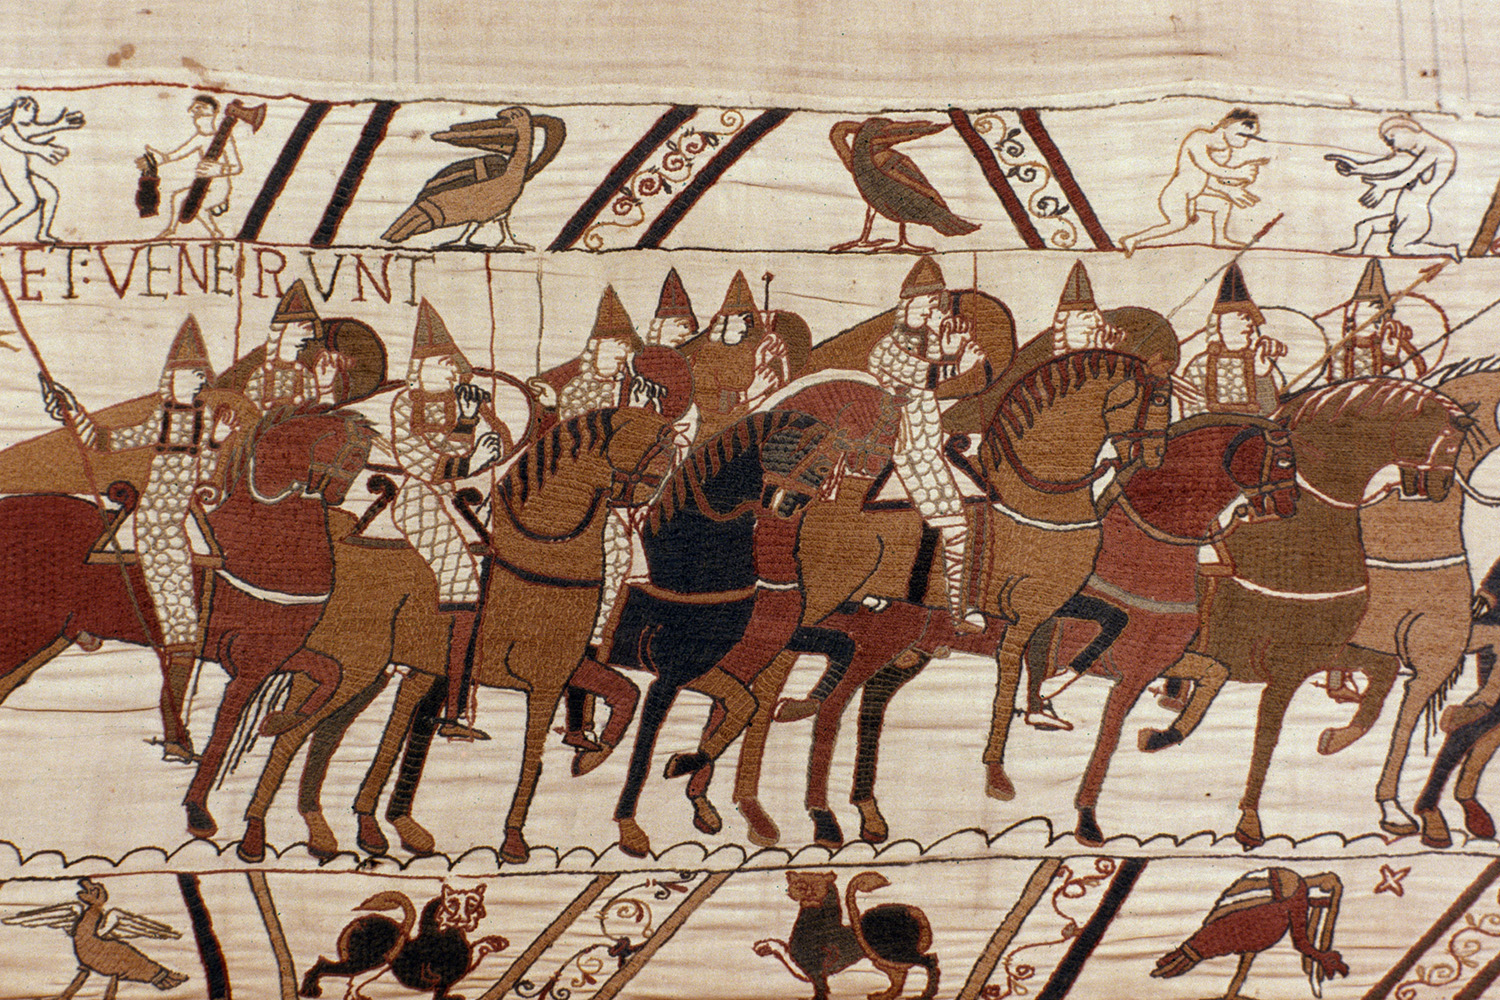 Stitches In Time A History Of The Bayeux Tapestry History Today See more 'medieval tapestry edits' images on know your meme! https www historytoday com miscellanies stitches time history bayeux tapestry